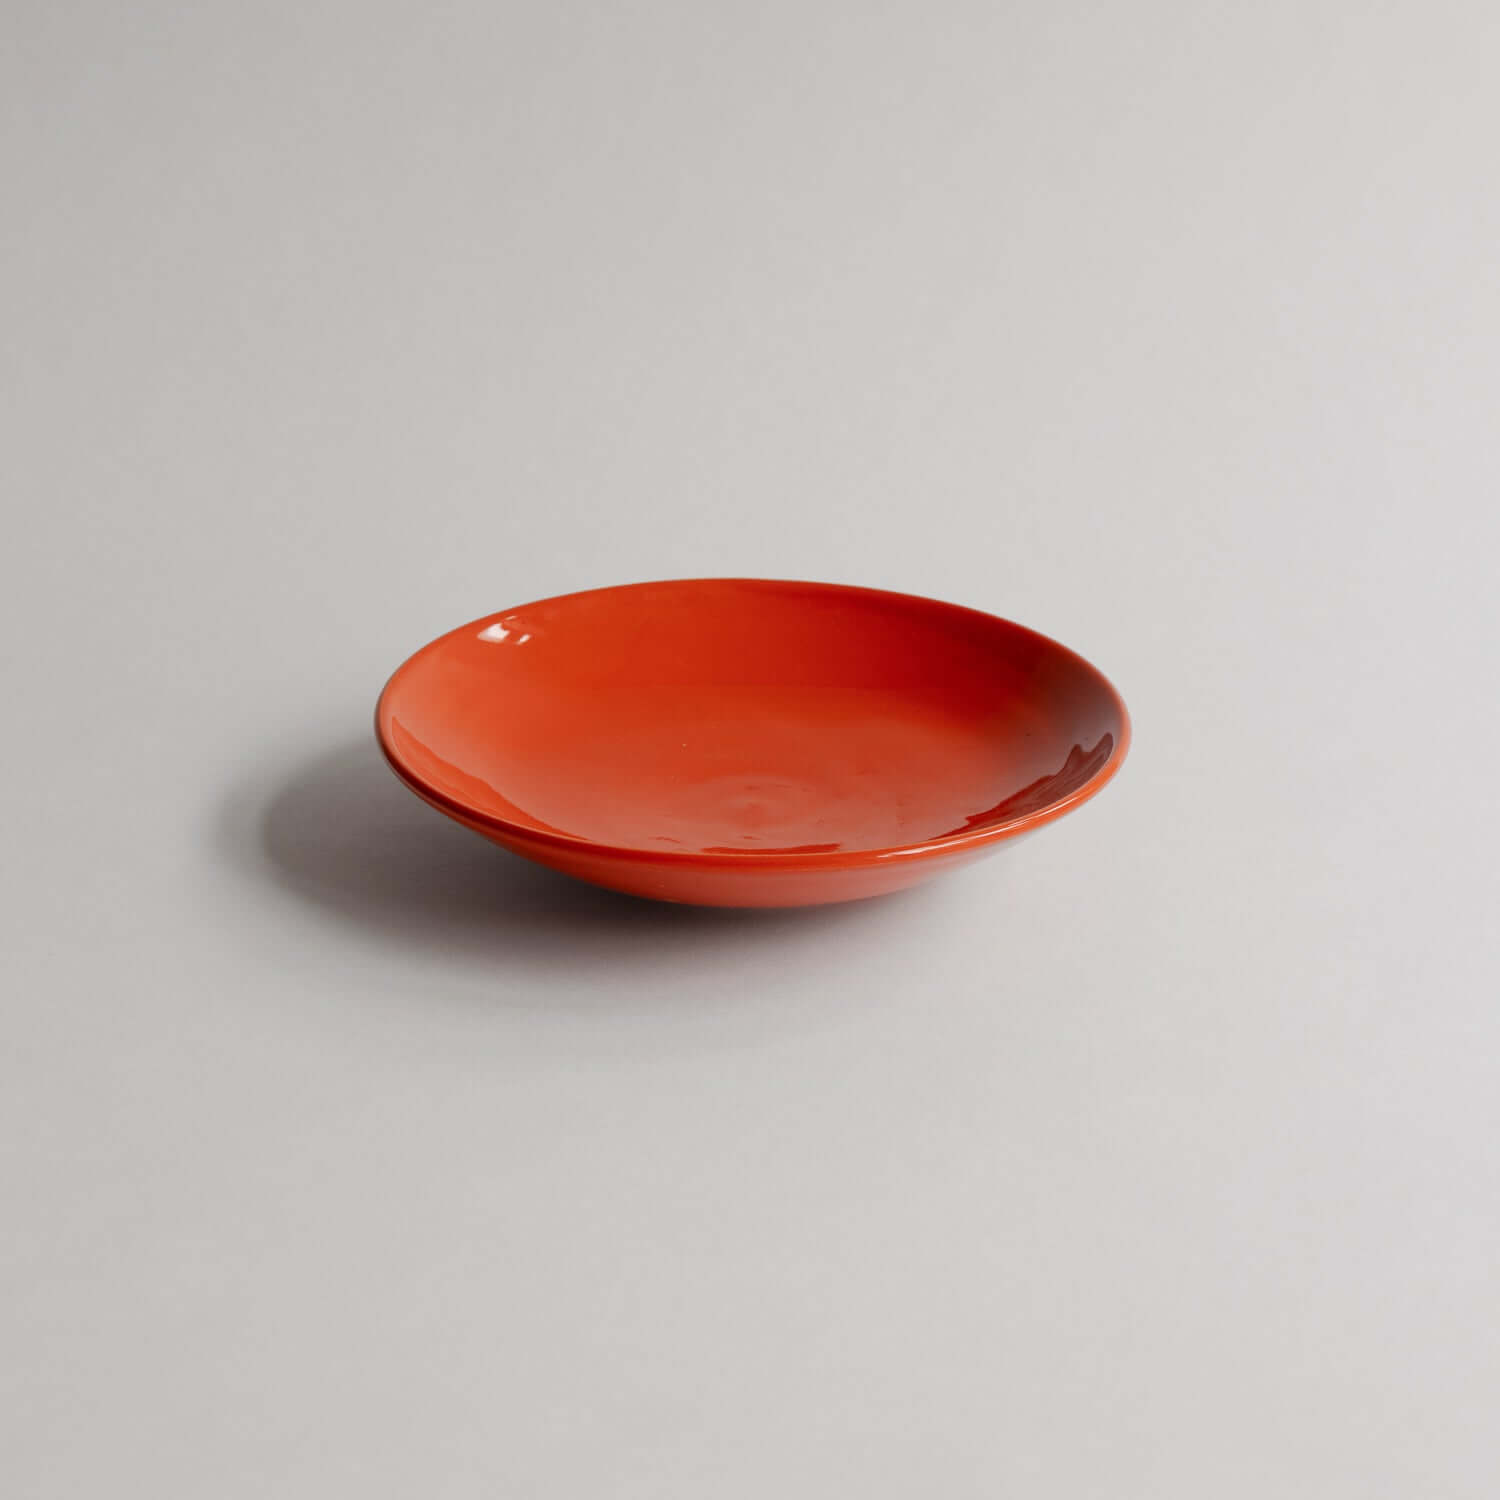 Elevate your space with the classic grey Palo Santo Dish Yun, handmade from stoneware clay and finished with a vivid red glaze. Each piece is one-of-a-kind. von viola beuscher ceramics